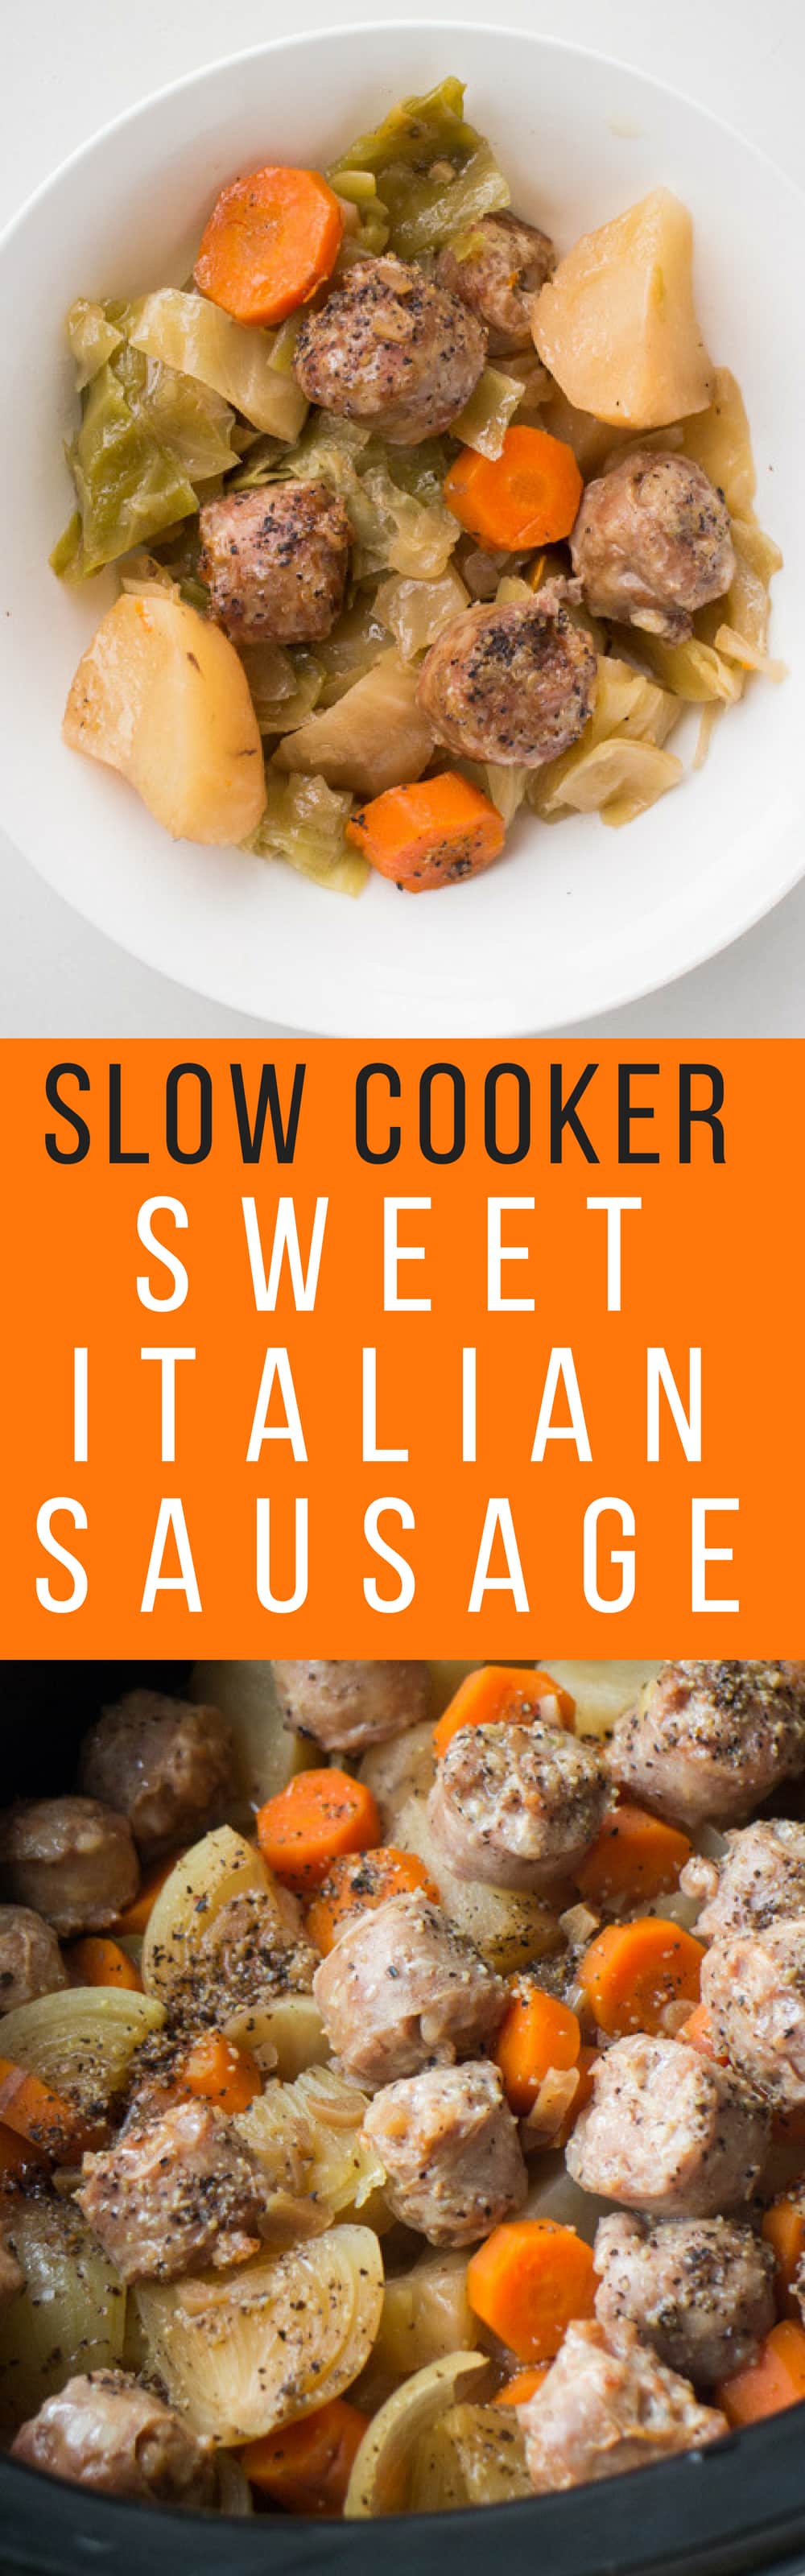 Slow Cooker Sausage and Cabbage is a easy crock pot recipe ready in 6 hours! Add Sweet Italian Sausage links and vegetables (potatoes, cabbage, carrots and onion!) into your slow cooker for a delicious comfort meal!